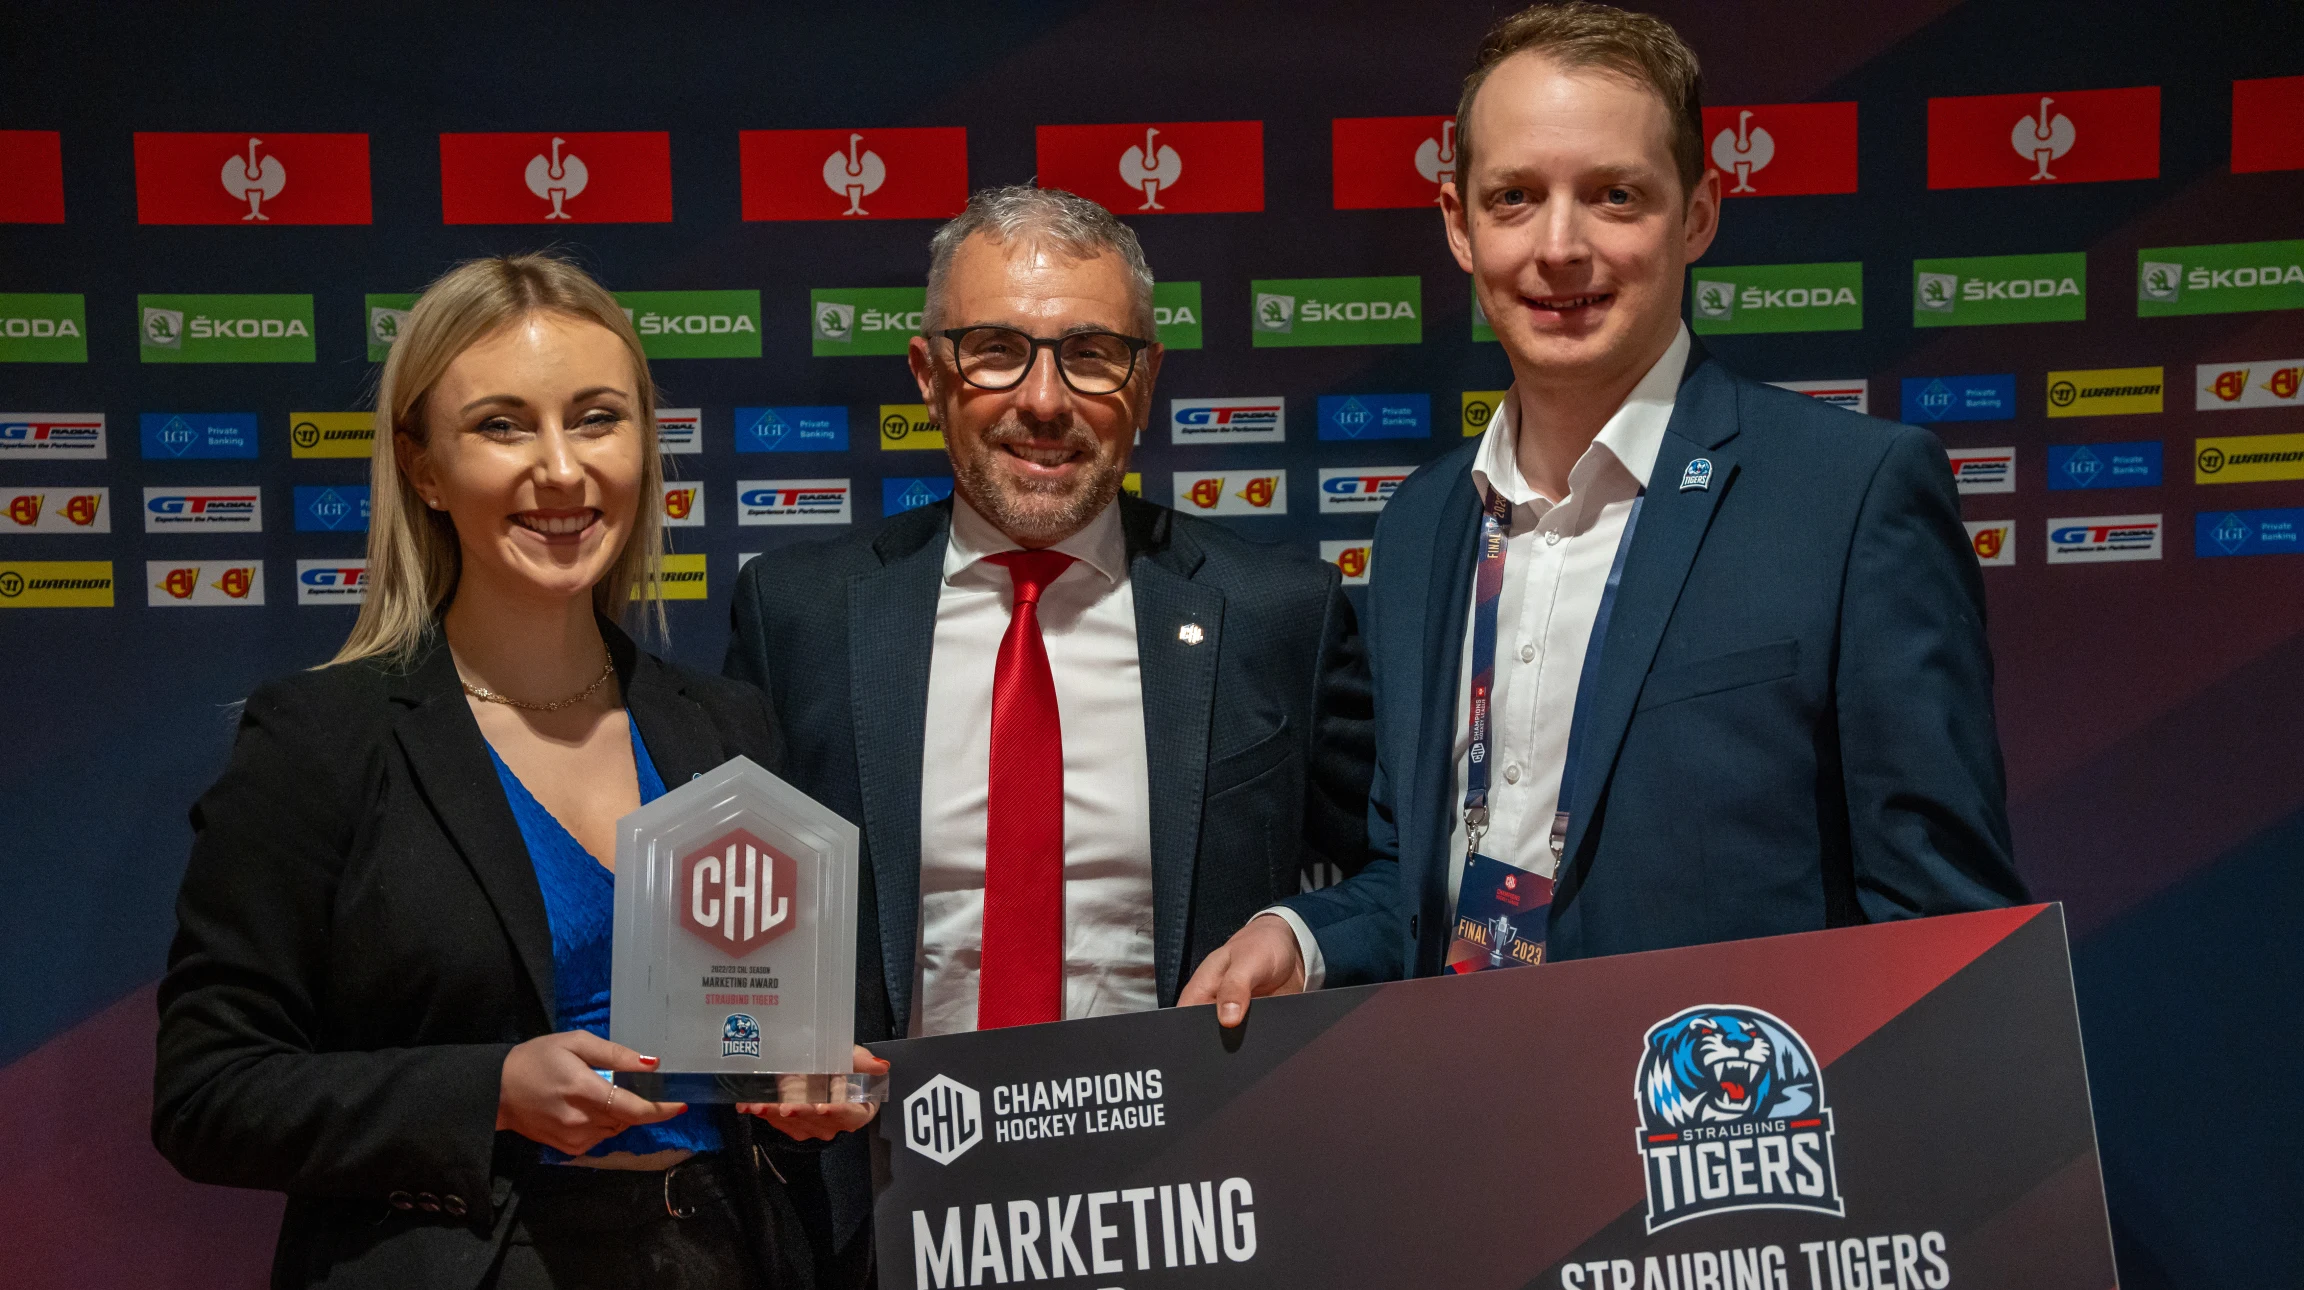 The Straubing Tigers win the 4th edition of the CHL Marketing Award